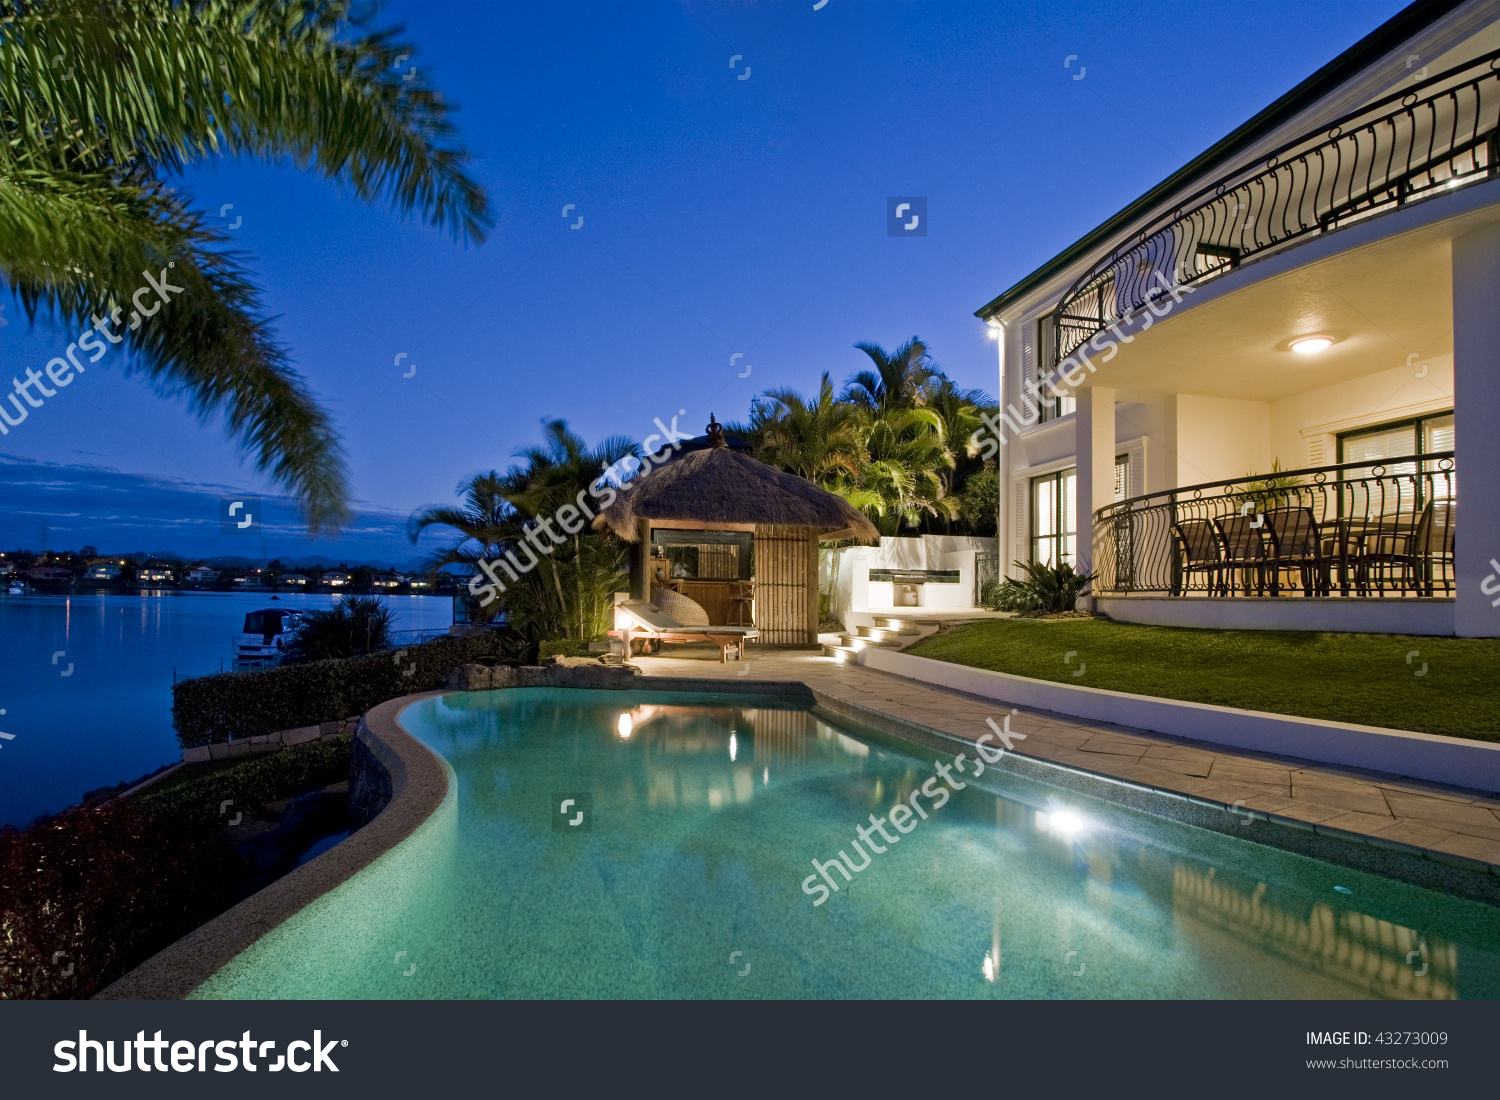 stock-photo-luxurious-mansion-exterior-at-dusk-overlooking-pool-canal-and-bali-hut-43273009